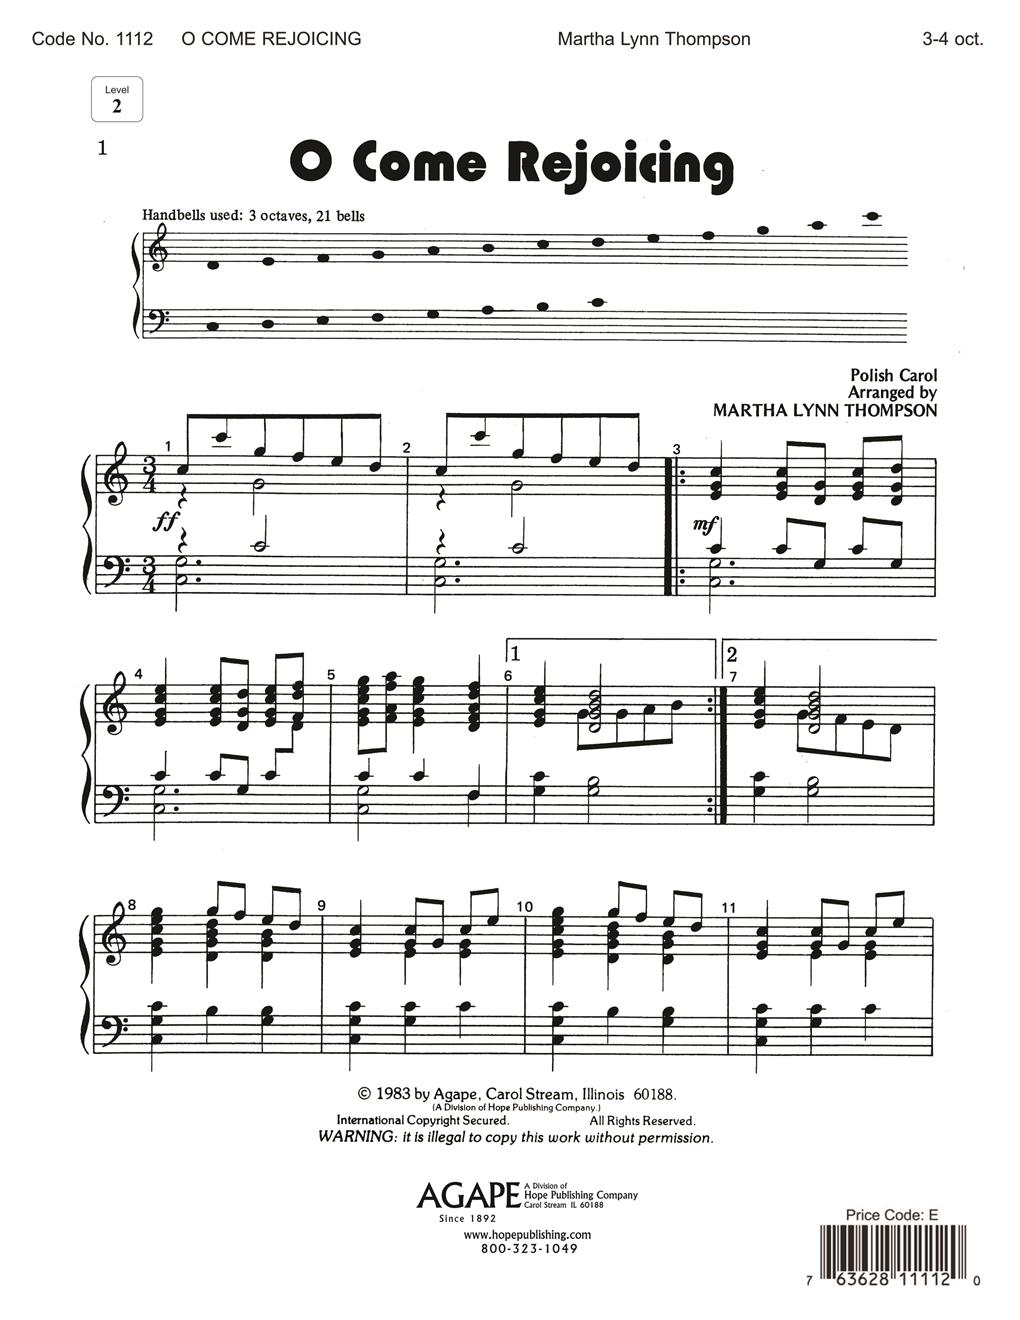 O Come Rejoicing - 3-4 Octave Cover Image